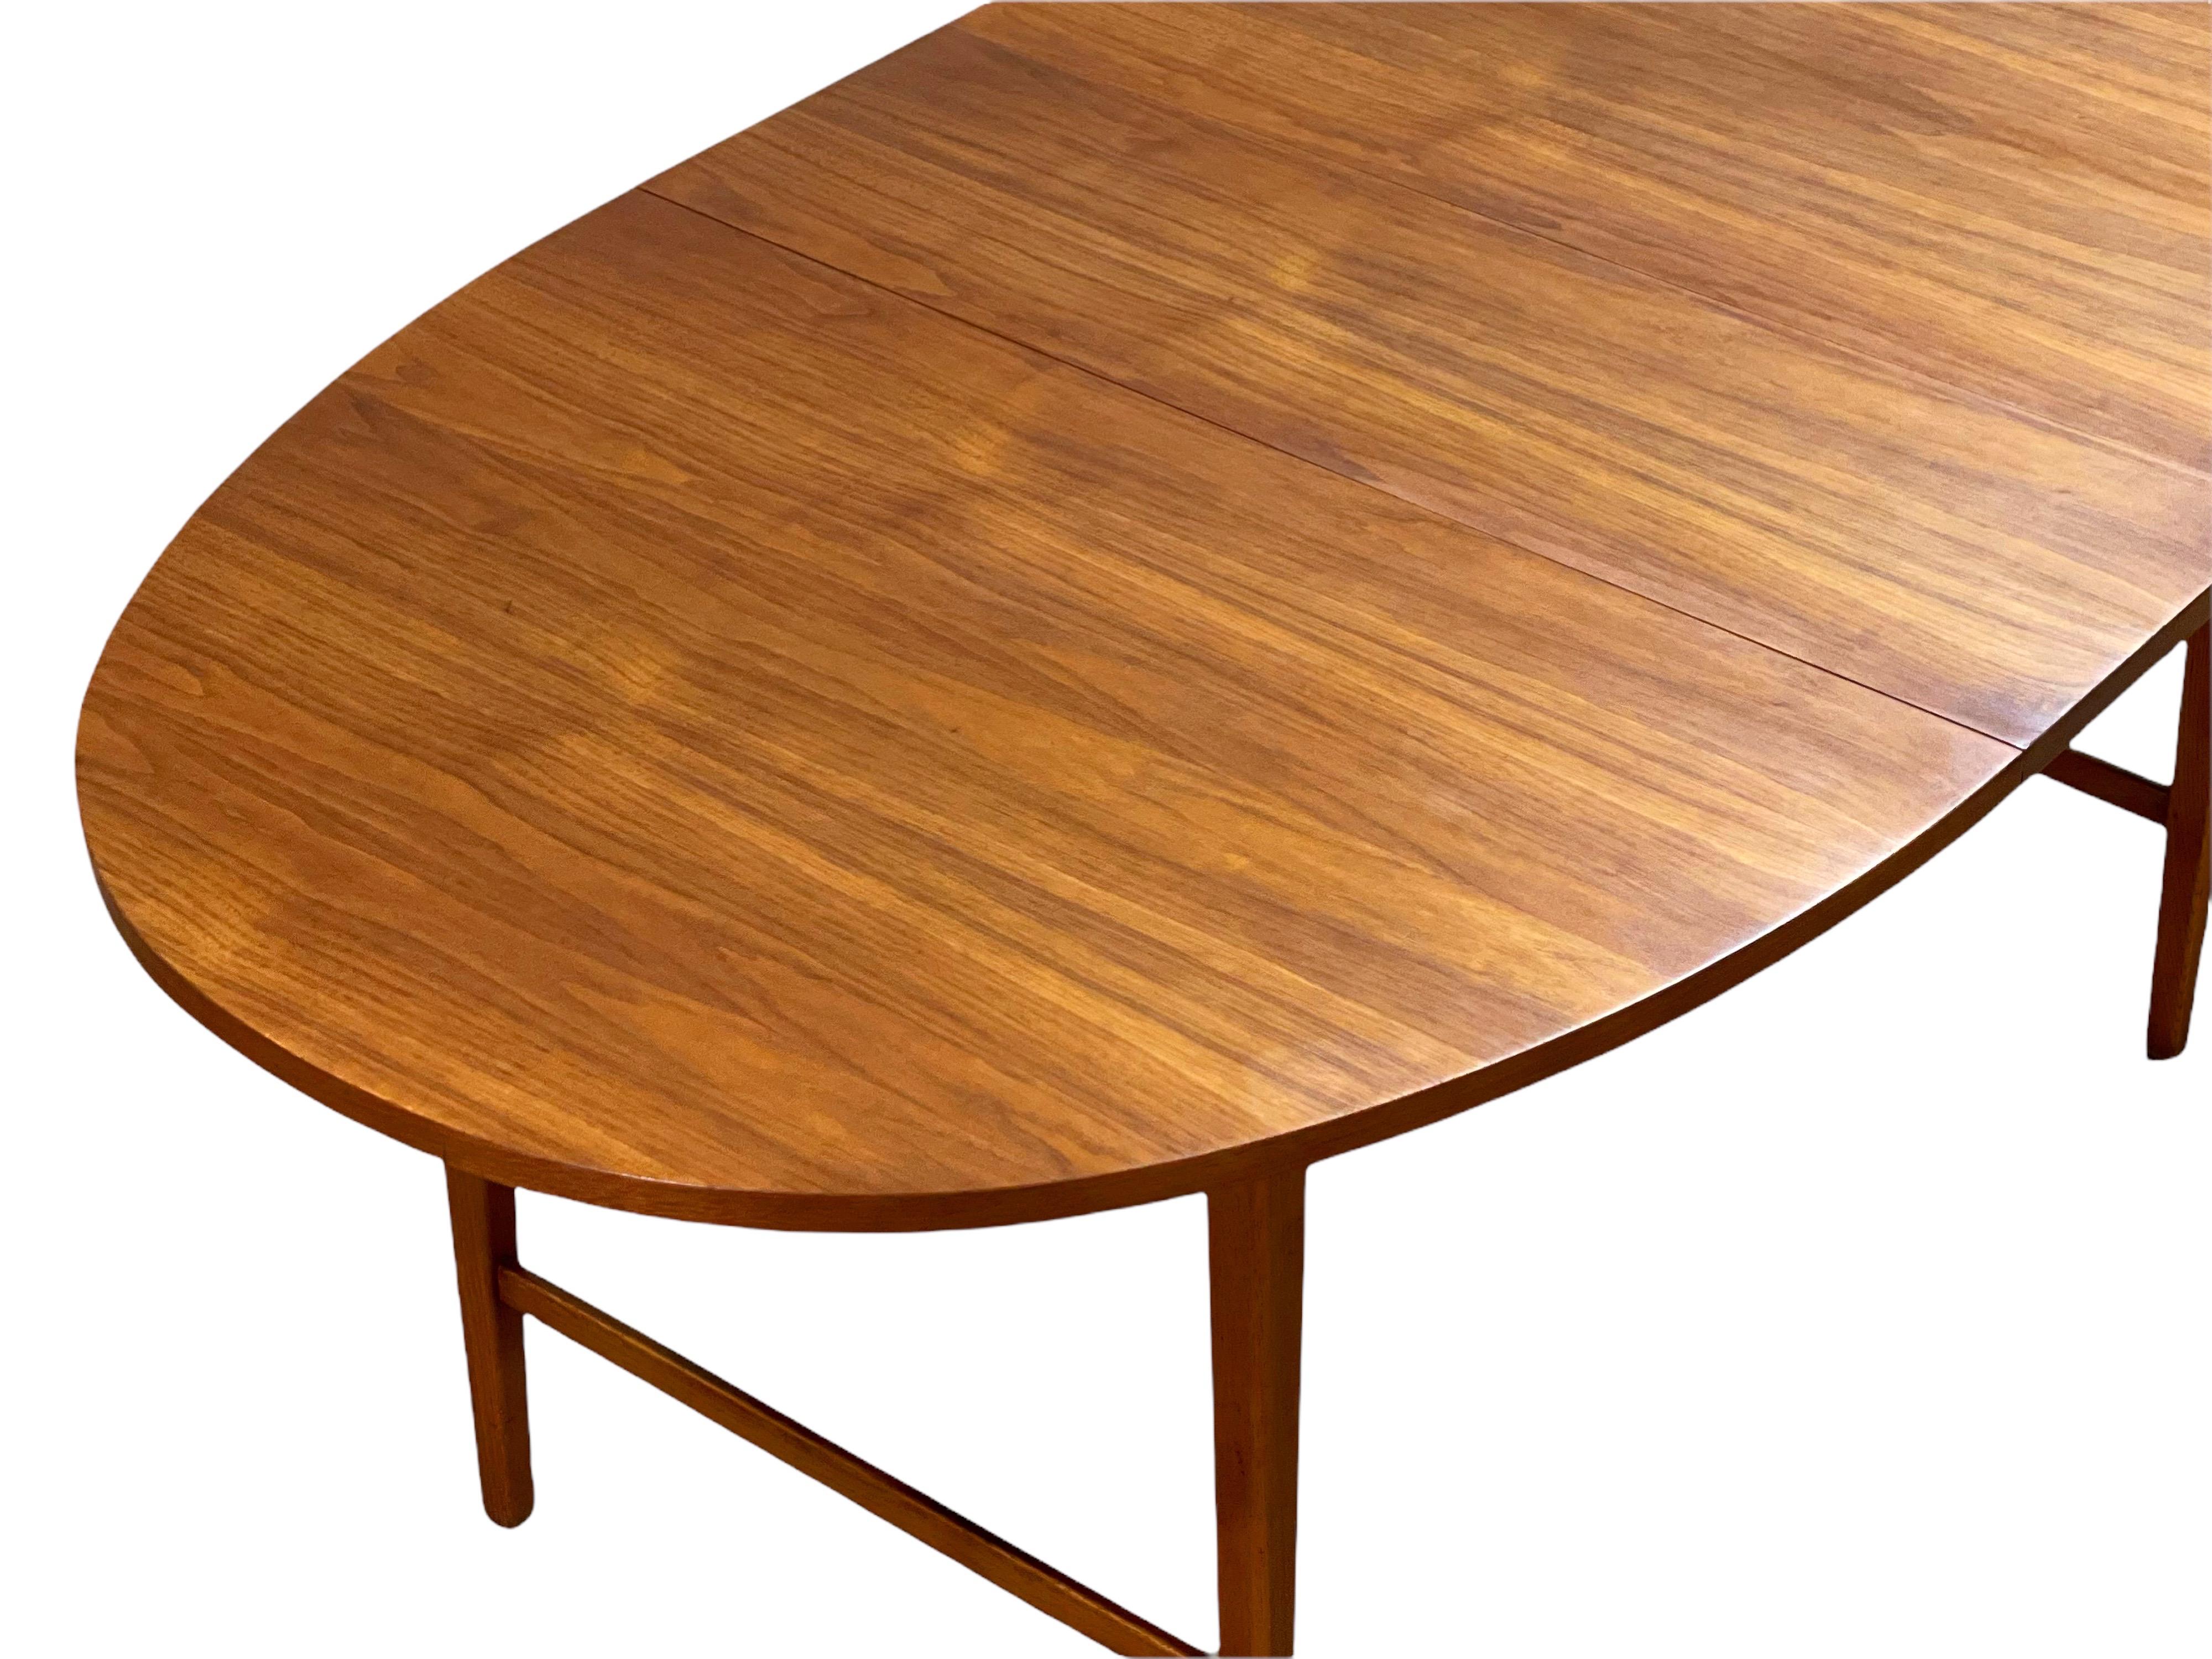 Midcentury Modern Paul McCobb Walnut Oval Dining Table, Components Line 1